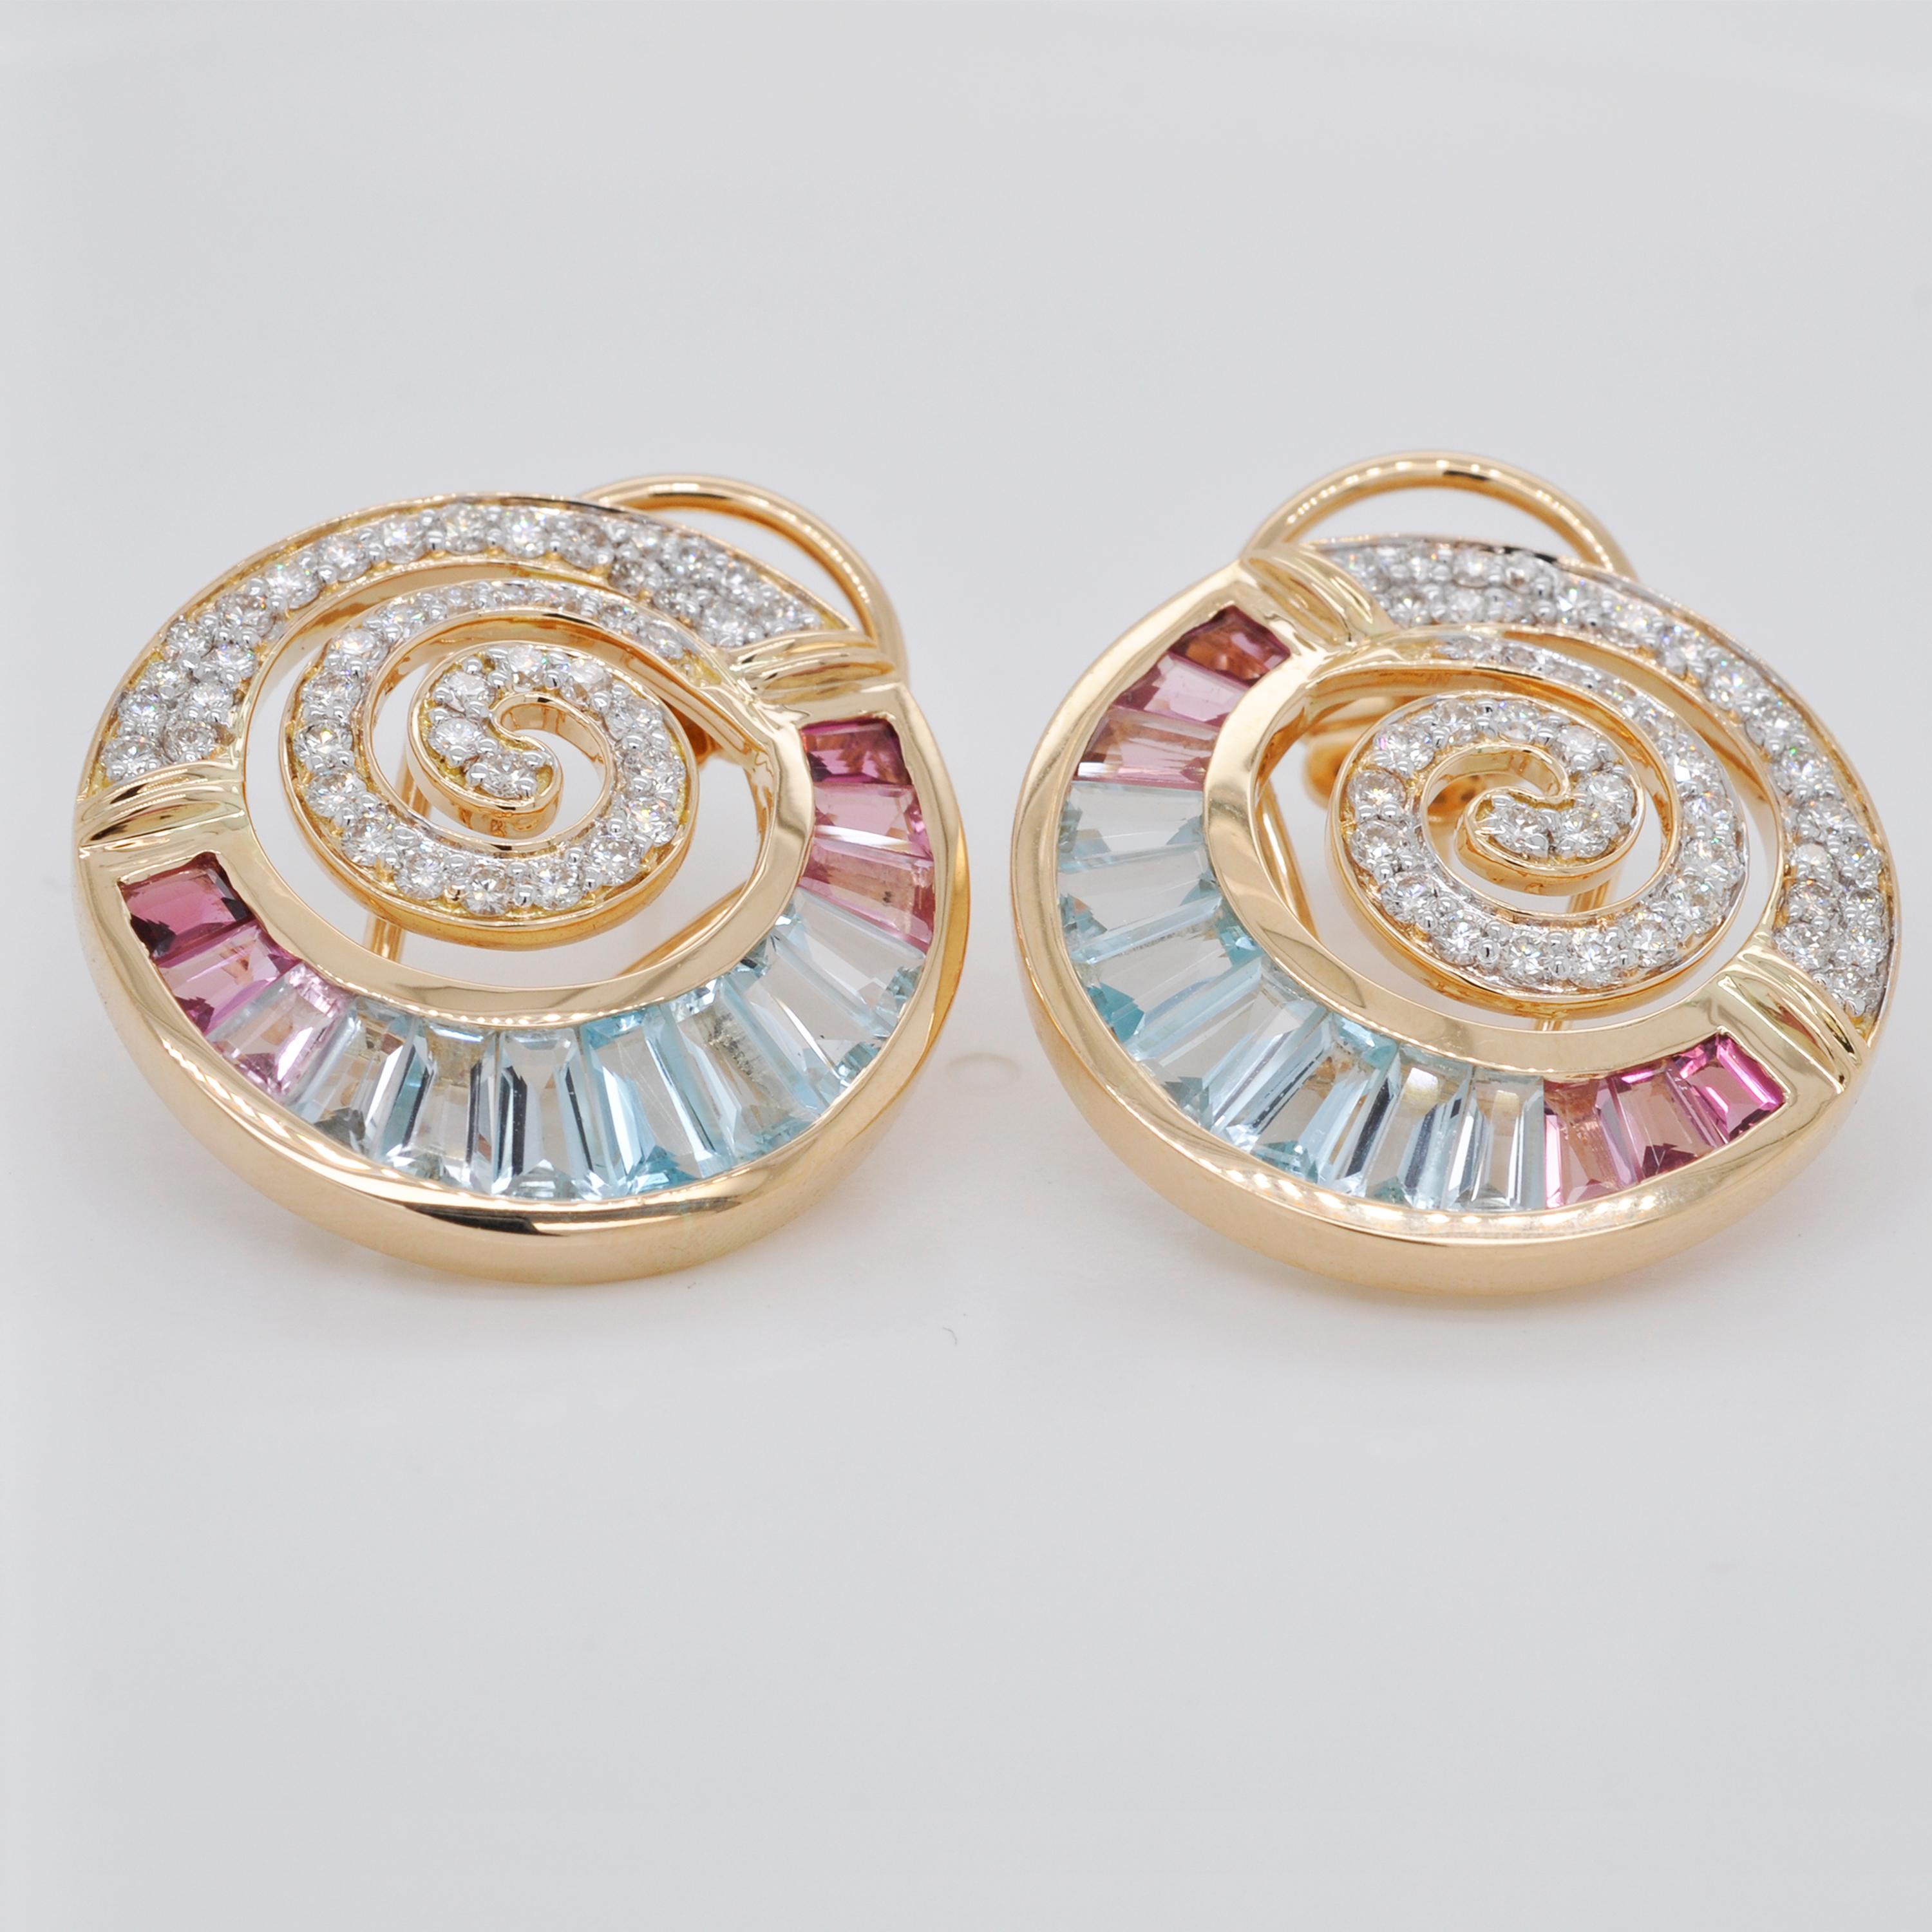 18 karat yellow gold aquamarine pink tourmaline taper baguette diamond clip-on earrings.

These 18 karat gold channel set baguette aquamarine pink tourmaline diamond earrings are inspired by the gorgeous colors of cherry blossom during the spring